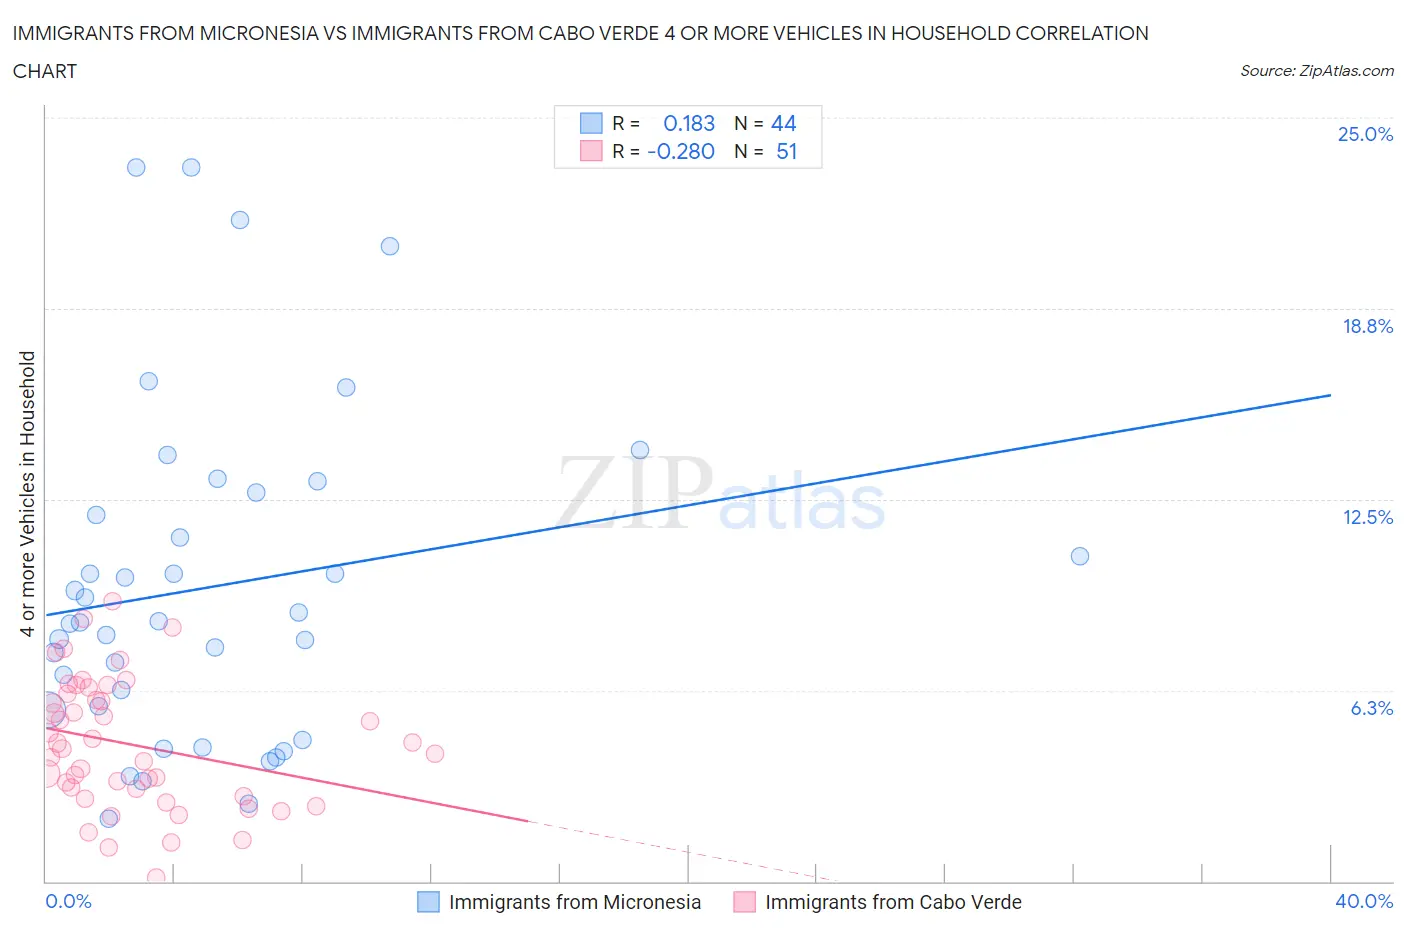 Immigrants from Micronesia vs Immigrants from Cabo Verde 4 or more Vehicles in Household